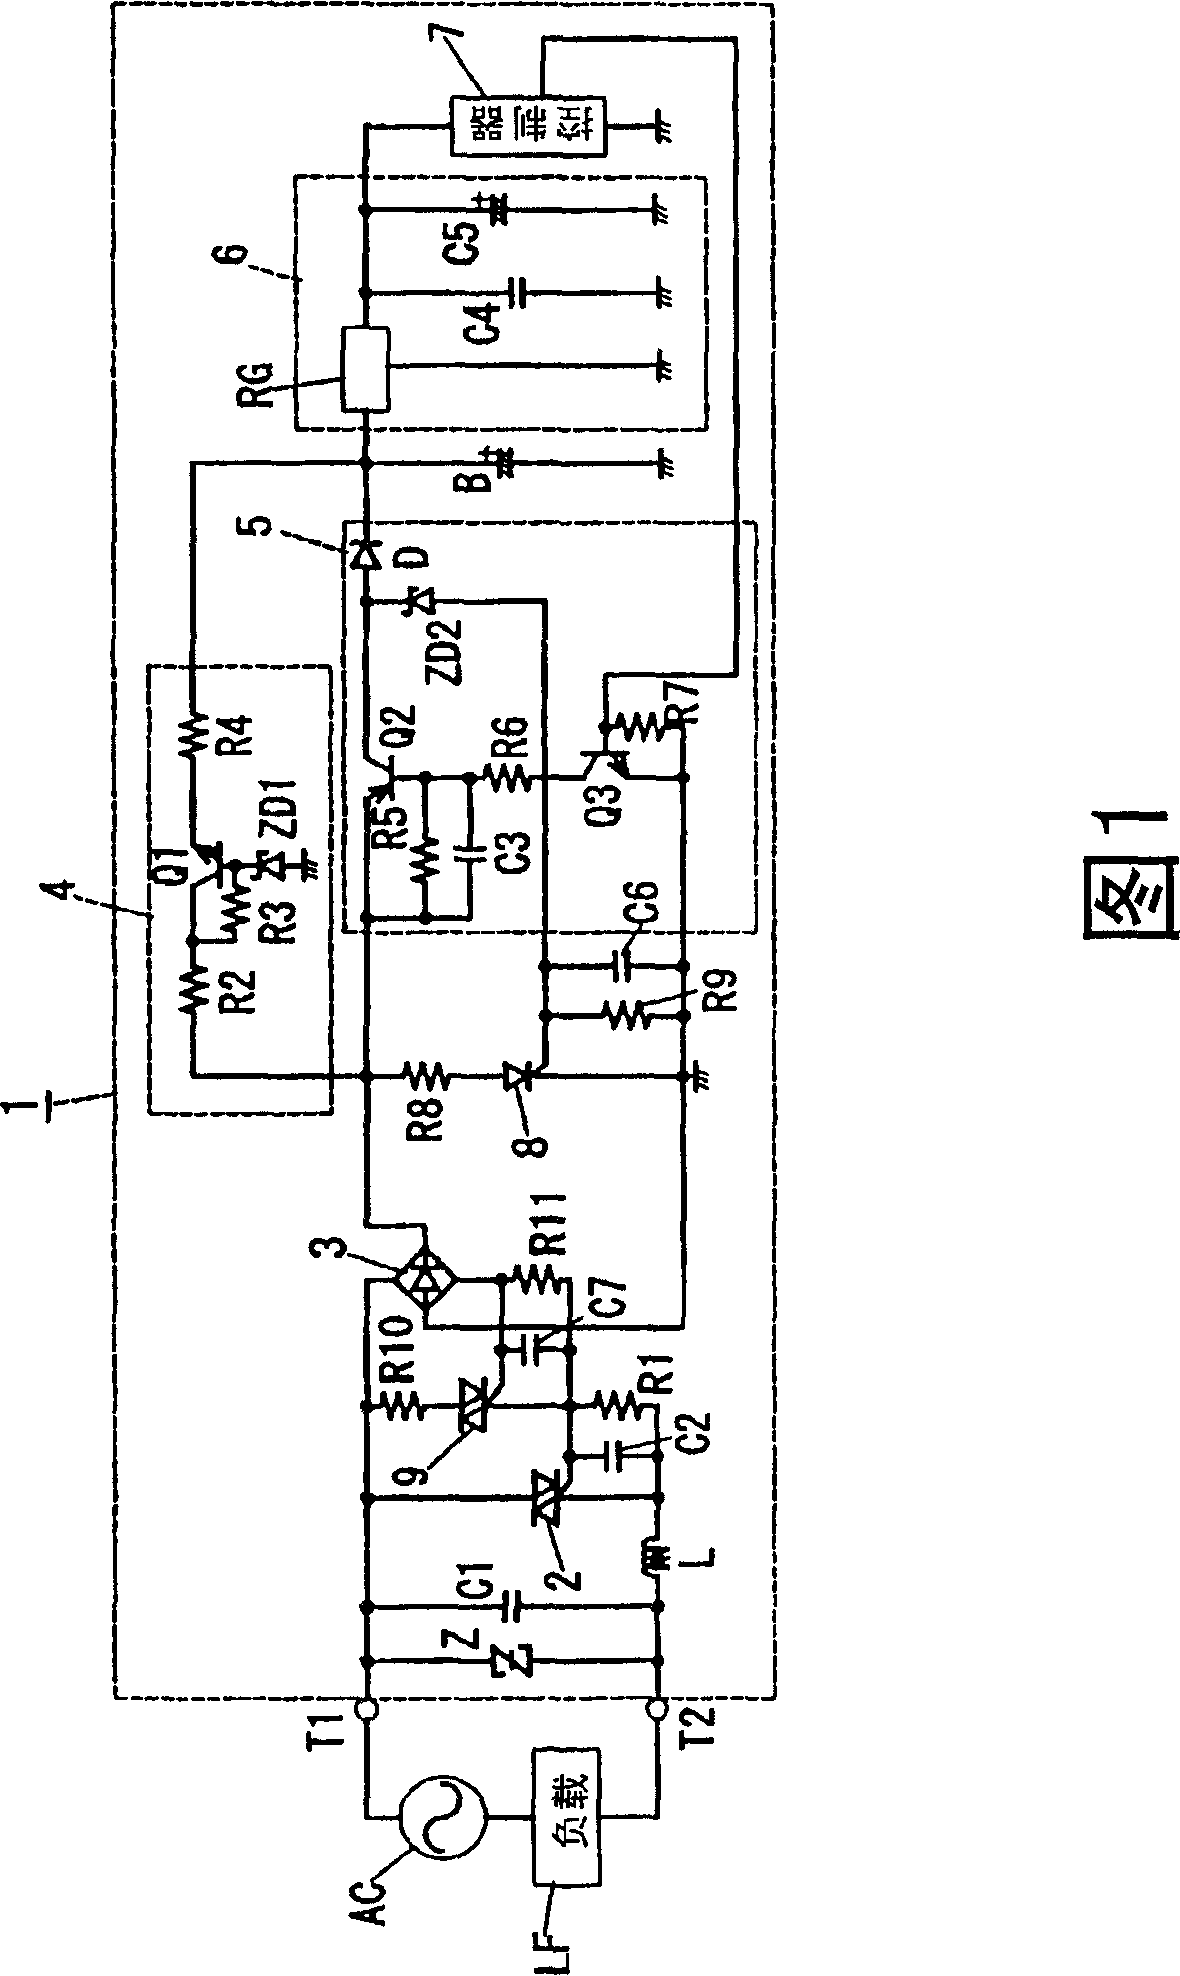 Two-wire switching device